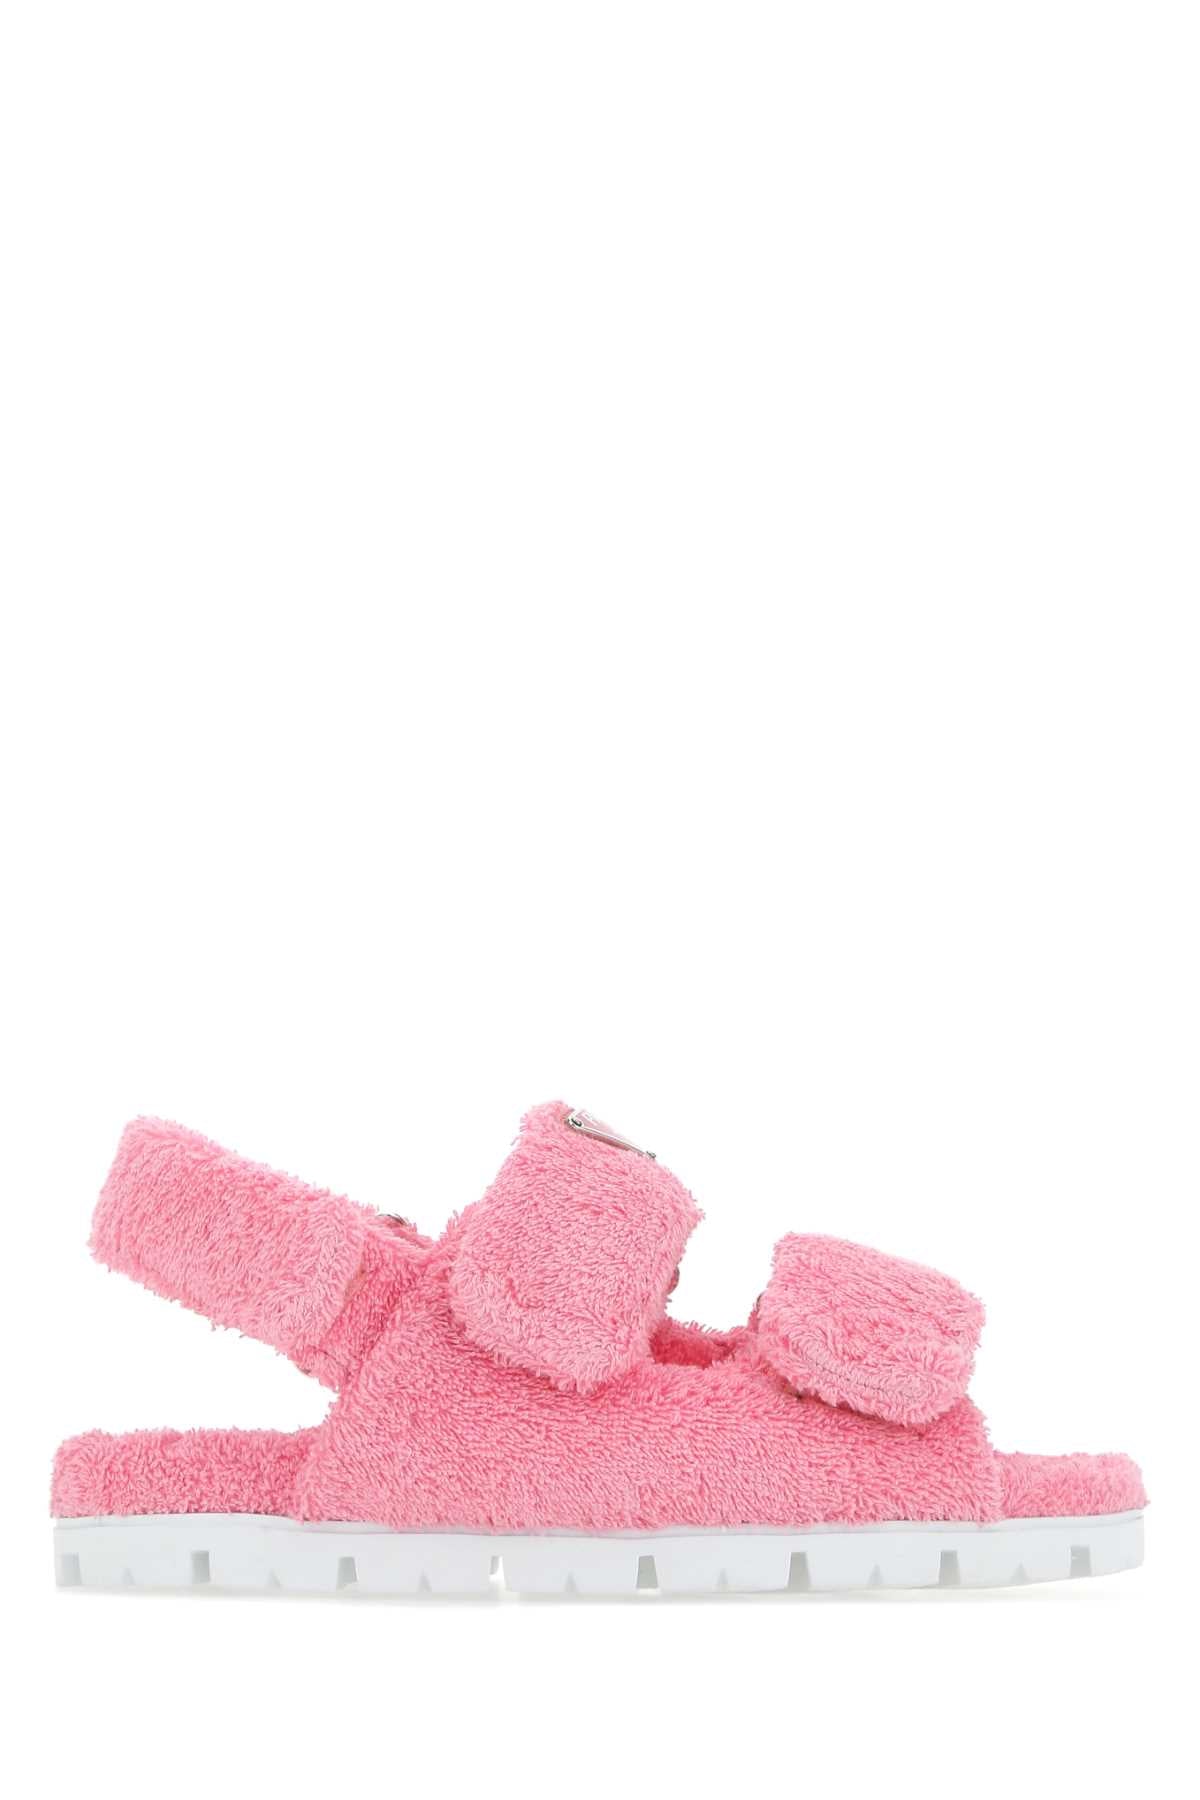 Terry Cloth Sandals - Pink